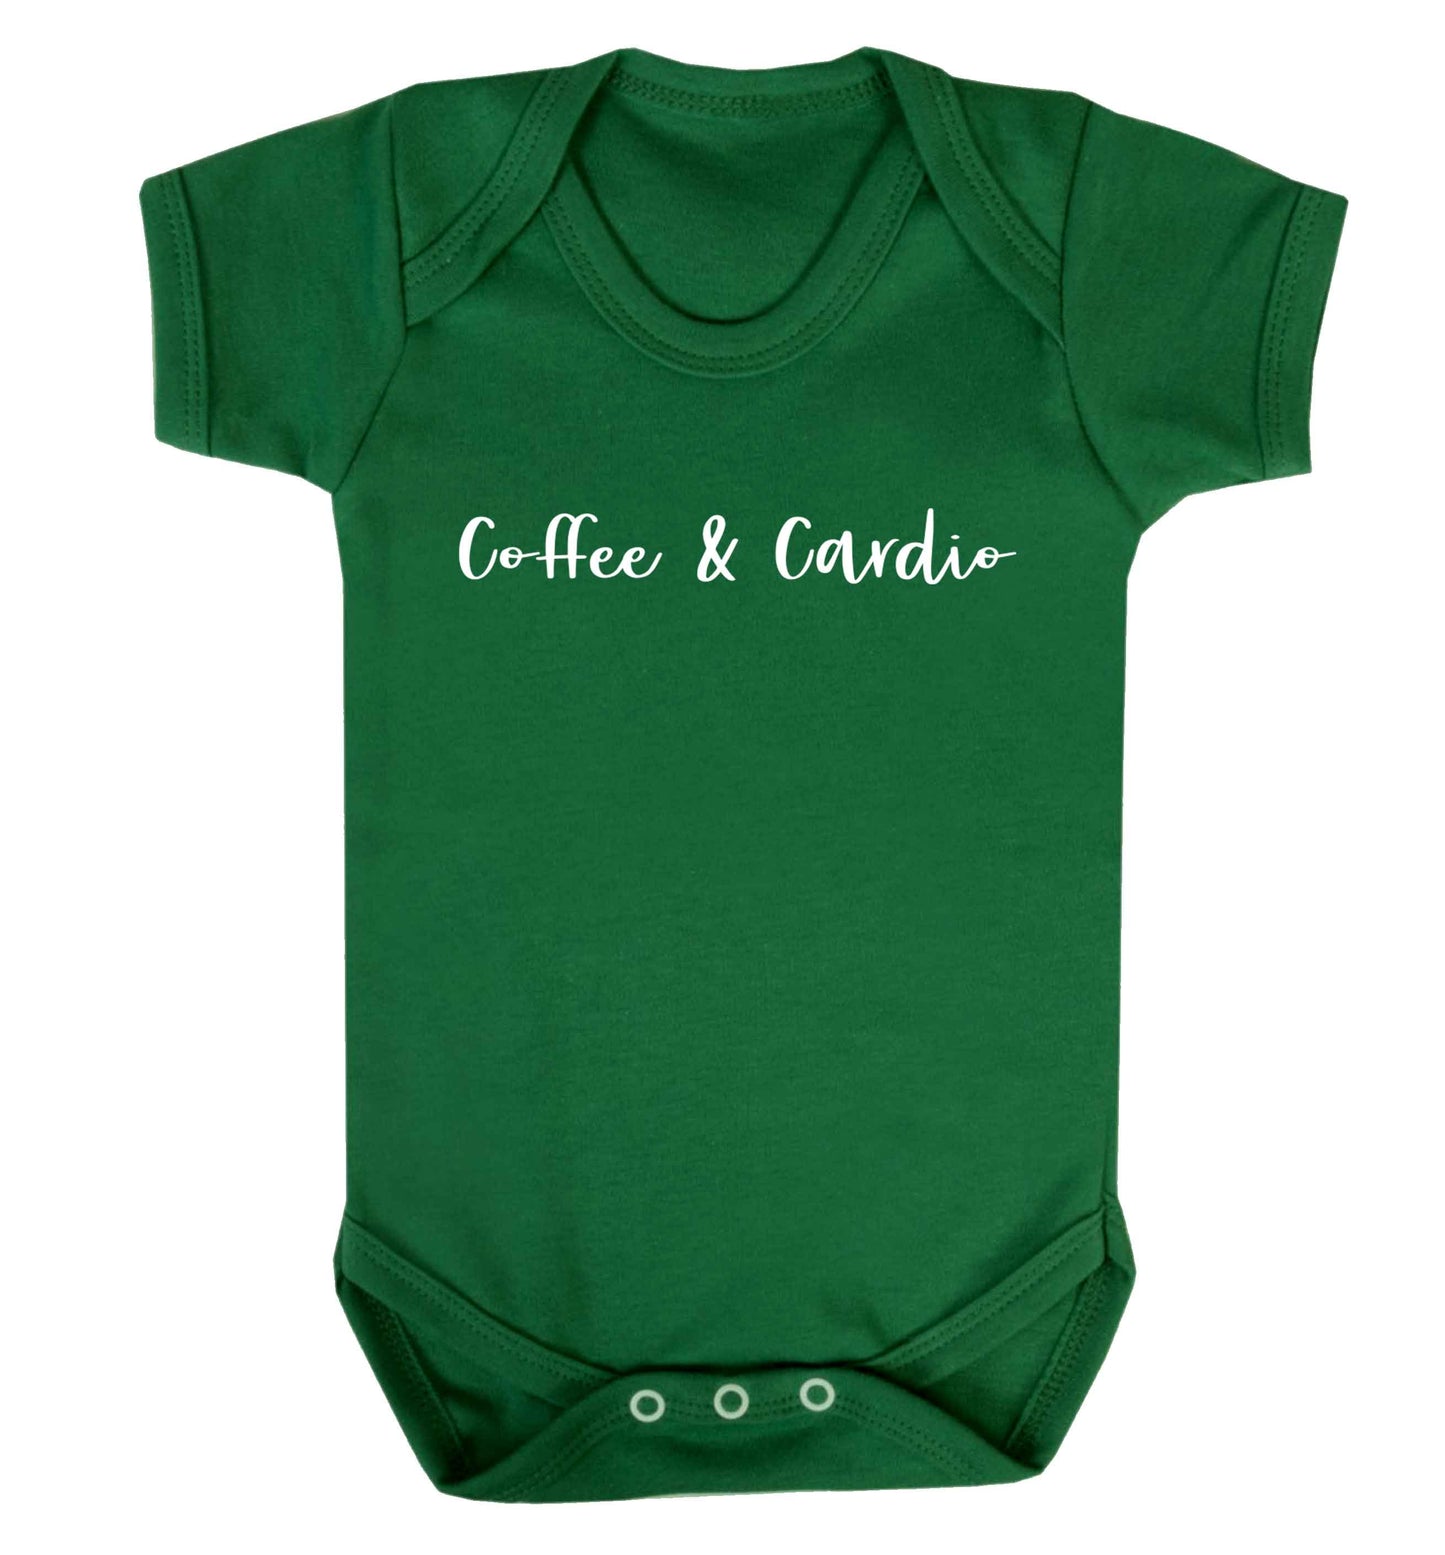 Coffee and cardio Baby Vest green 18-24 months